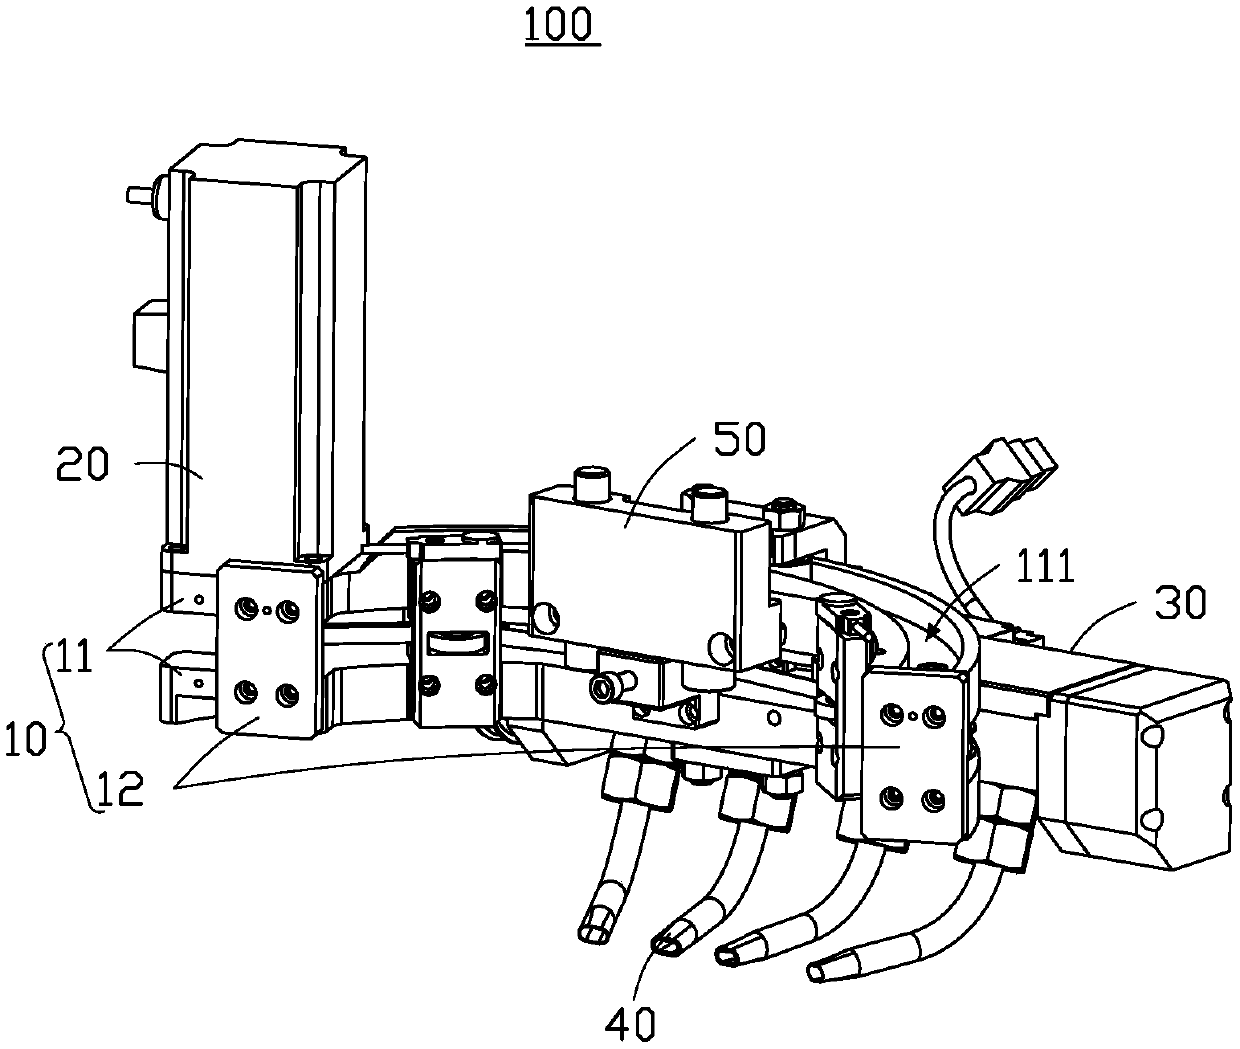 Spray cooling device